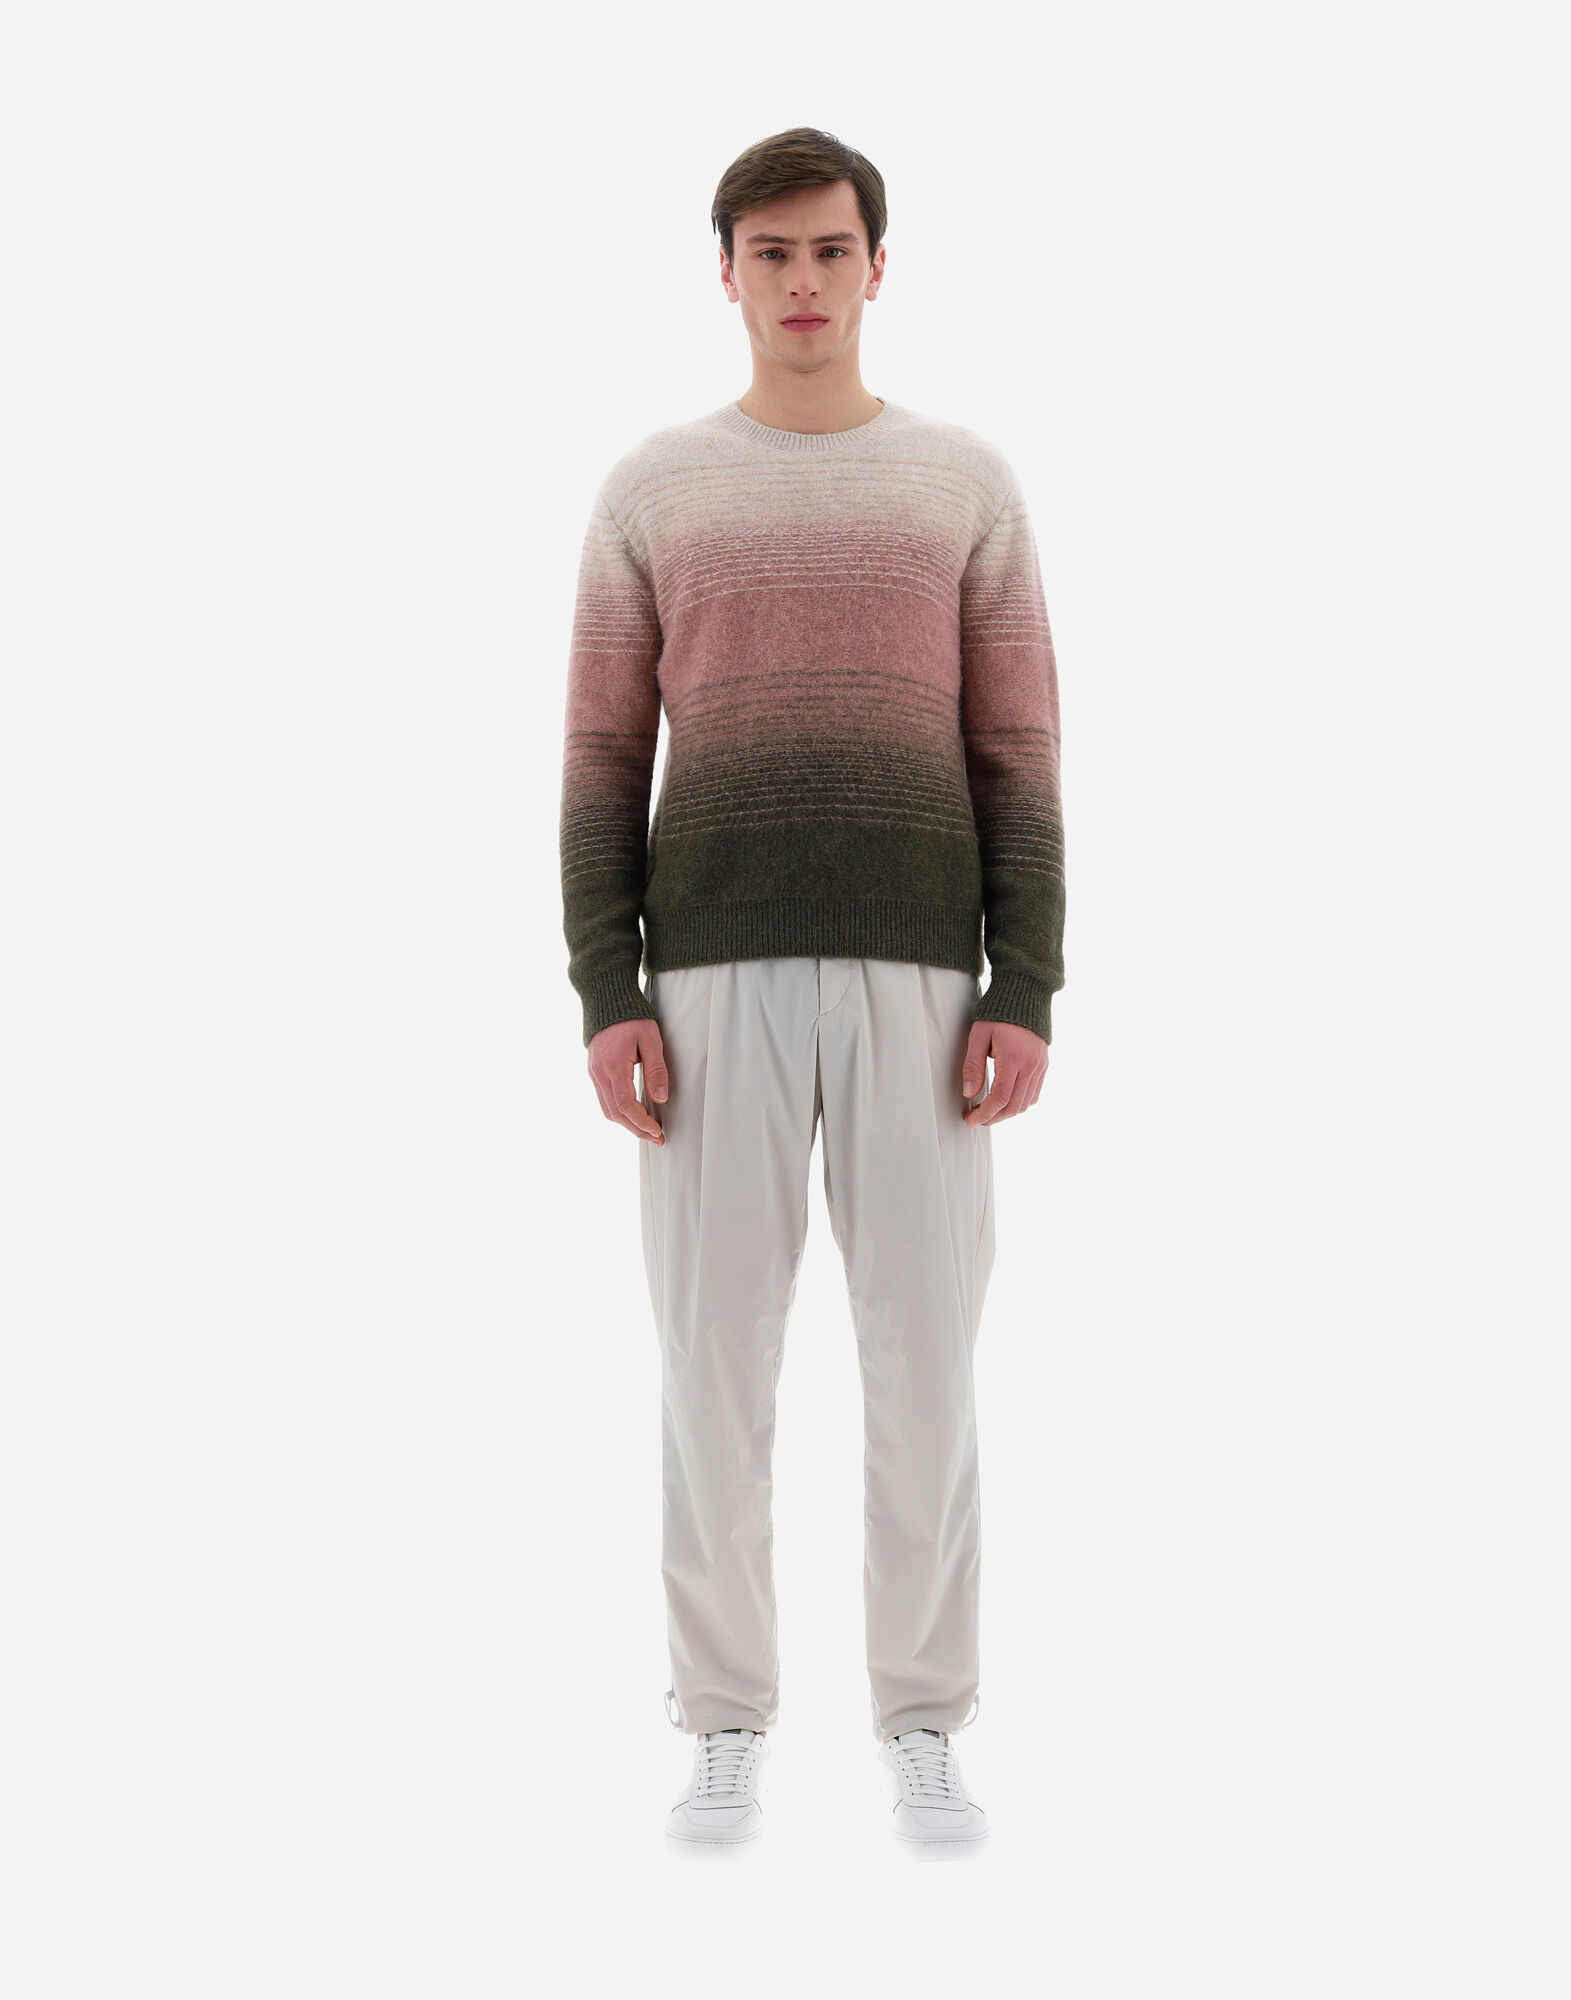 RESORT SWEATER IN FADED BLEND in Light Military for Men | Herno®